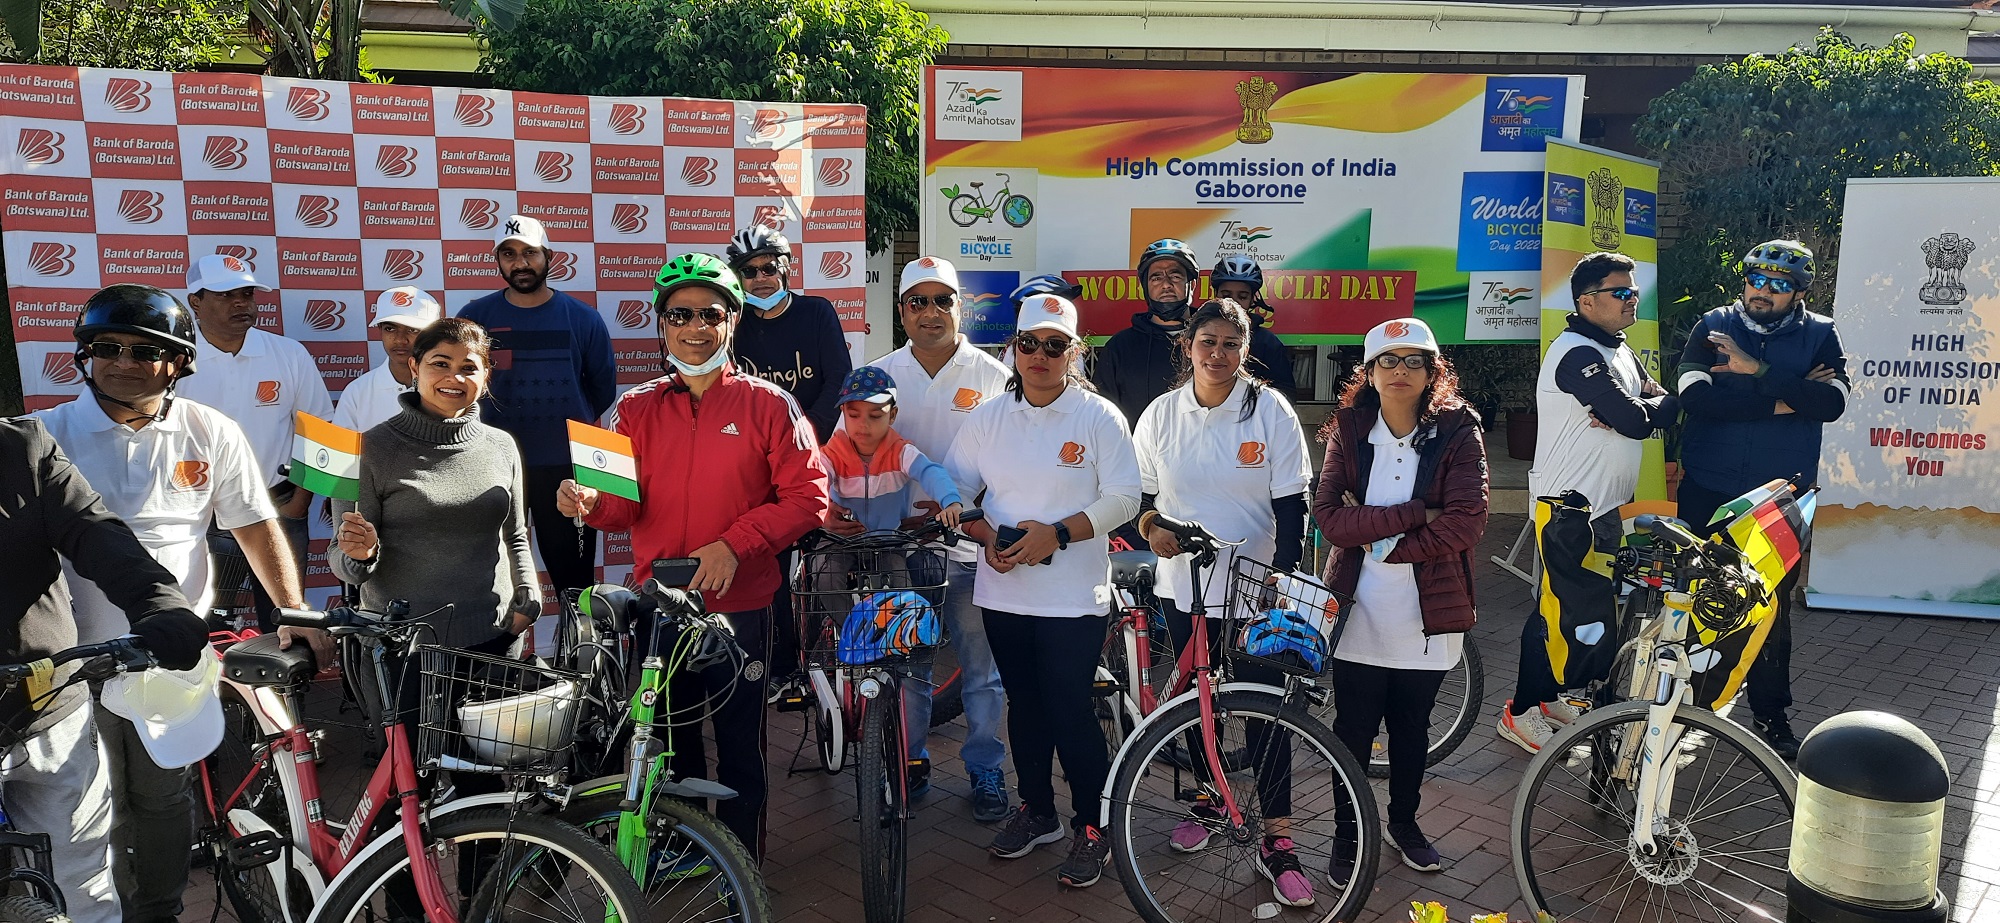 Cycling Event celebrating World Bicycle Day